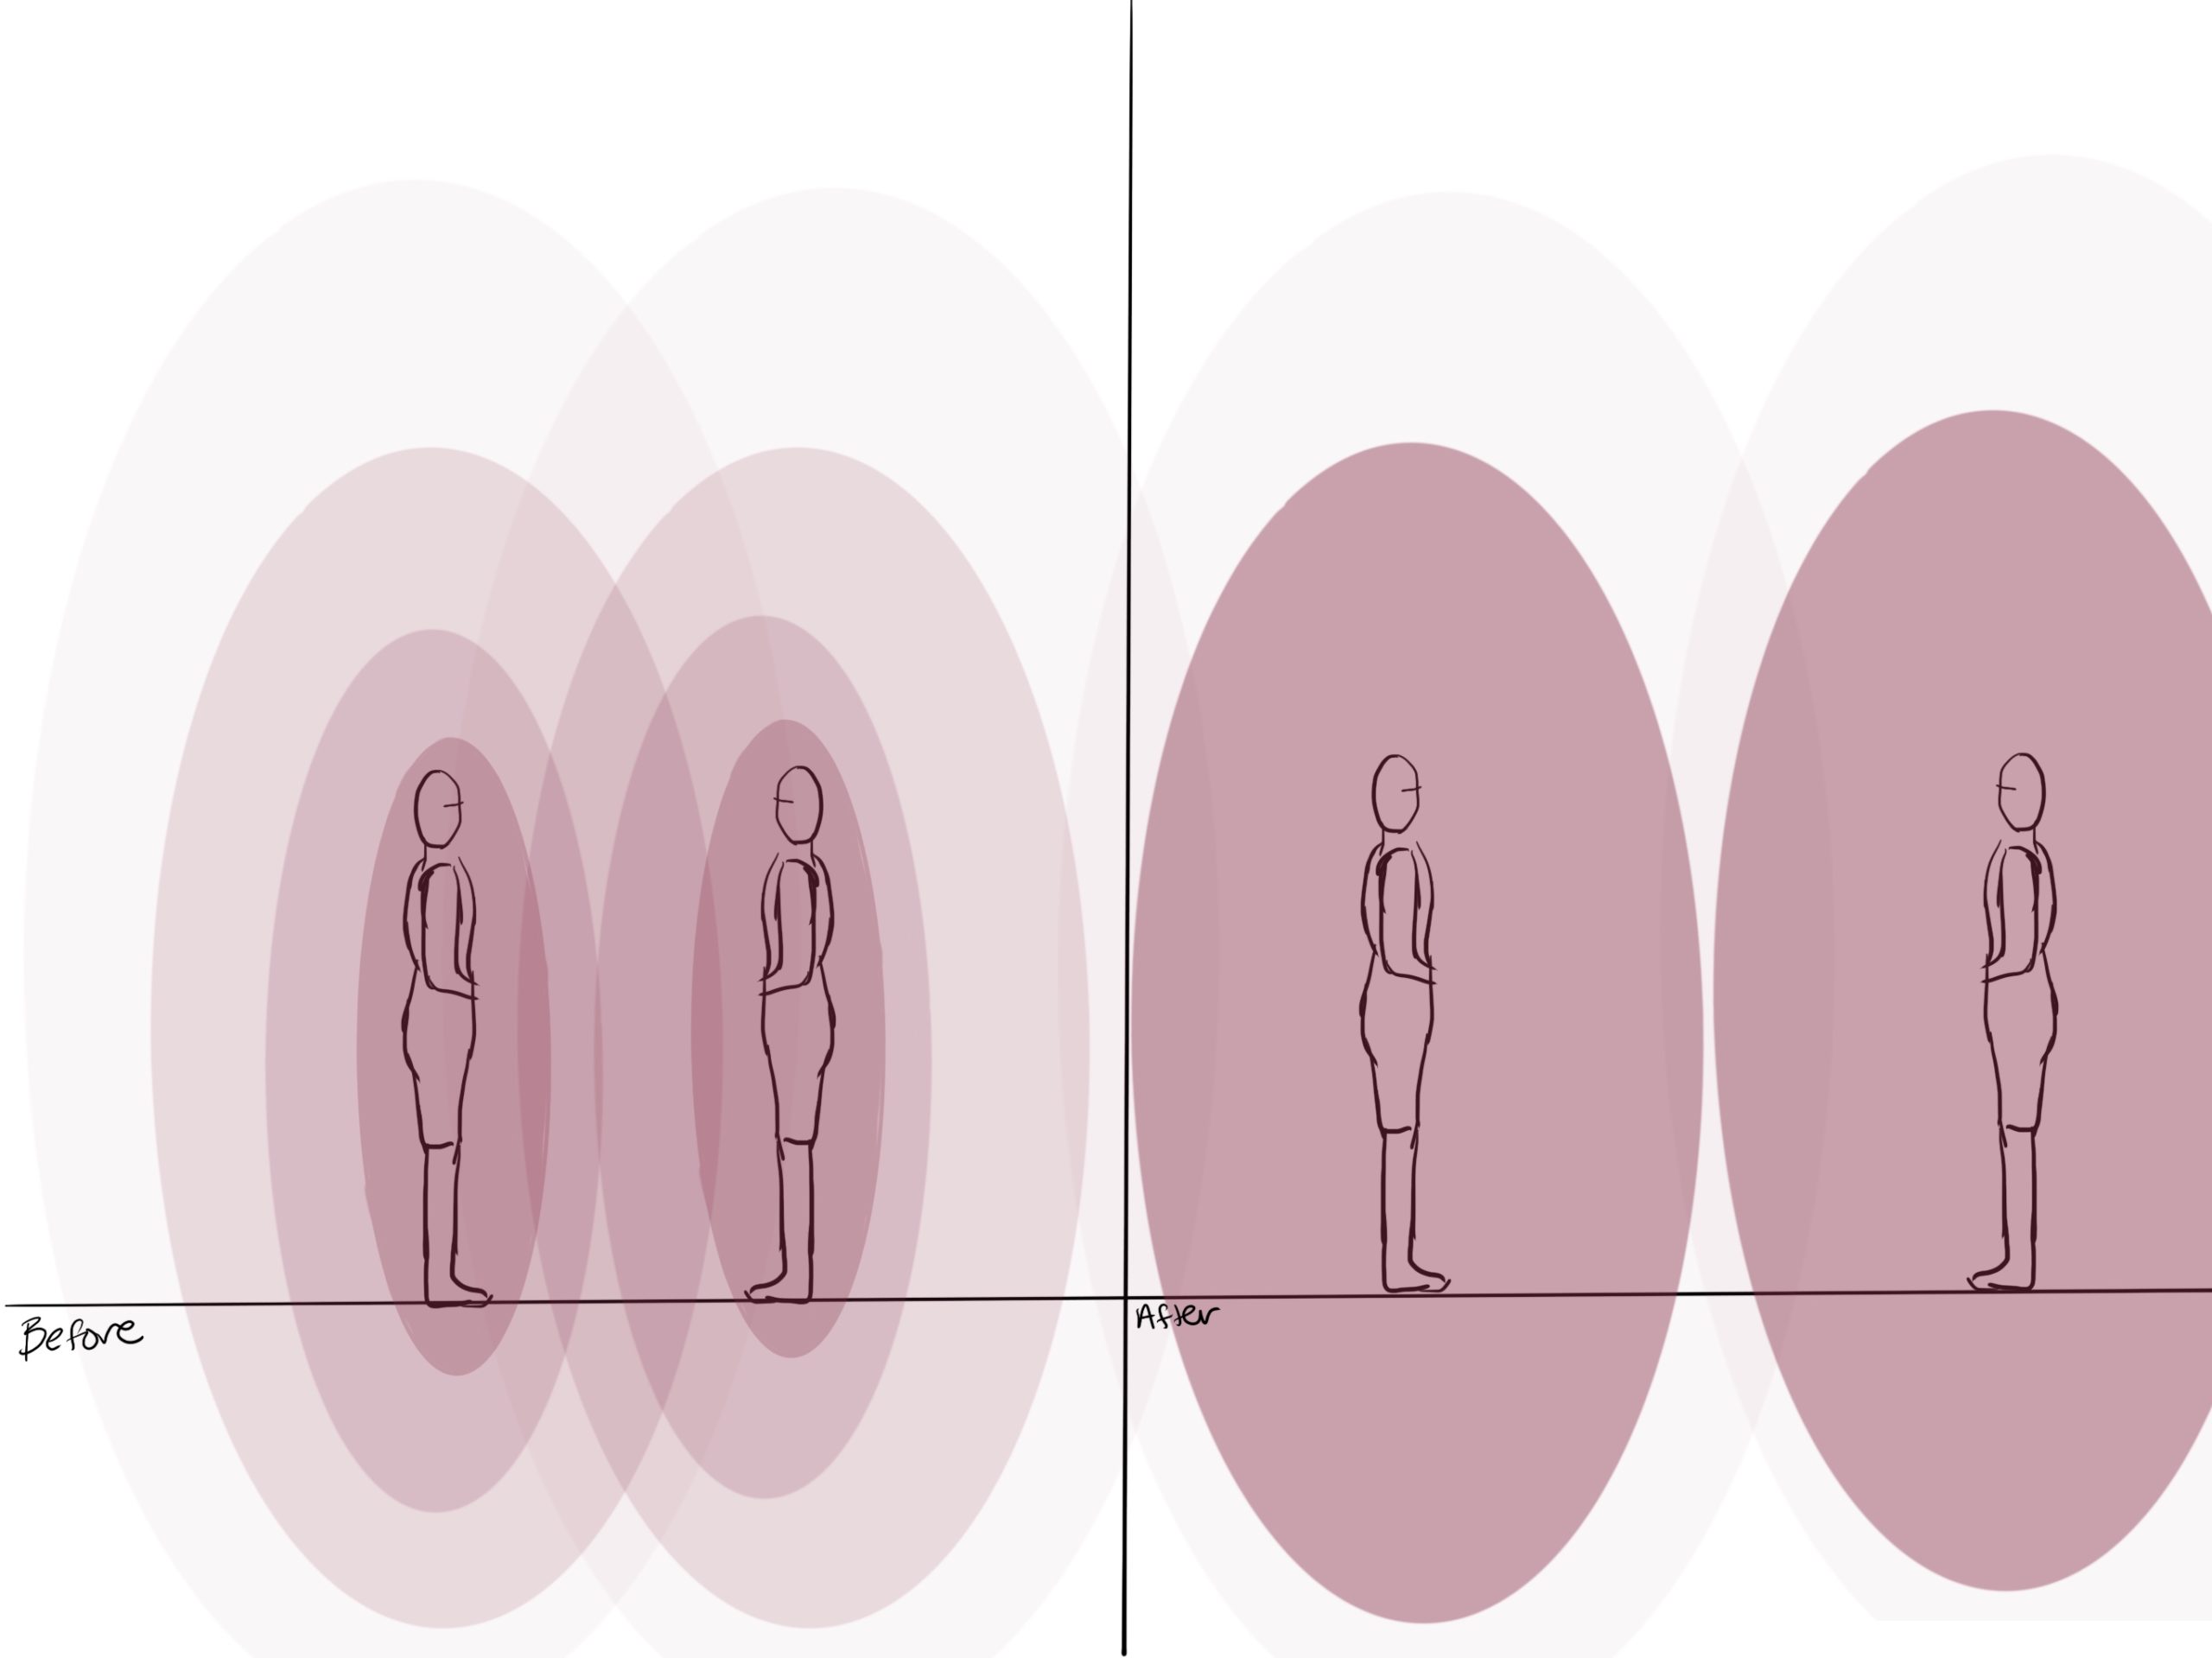 sketch showing how close people could stand together before versus how far they would stand after the pandemic